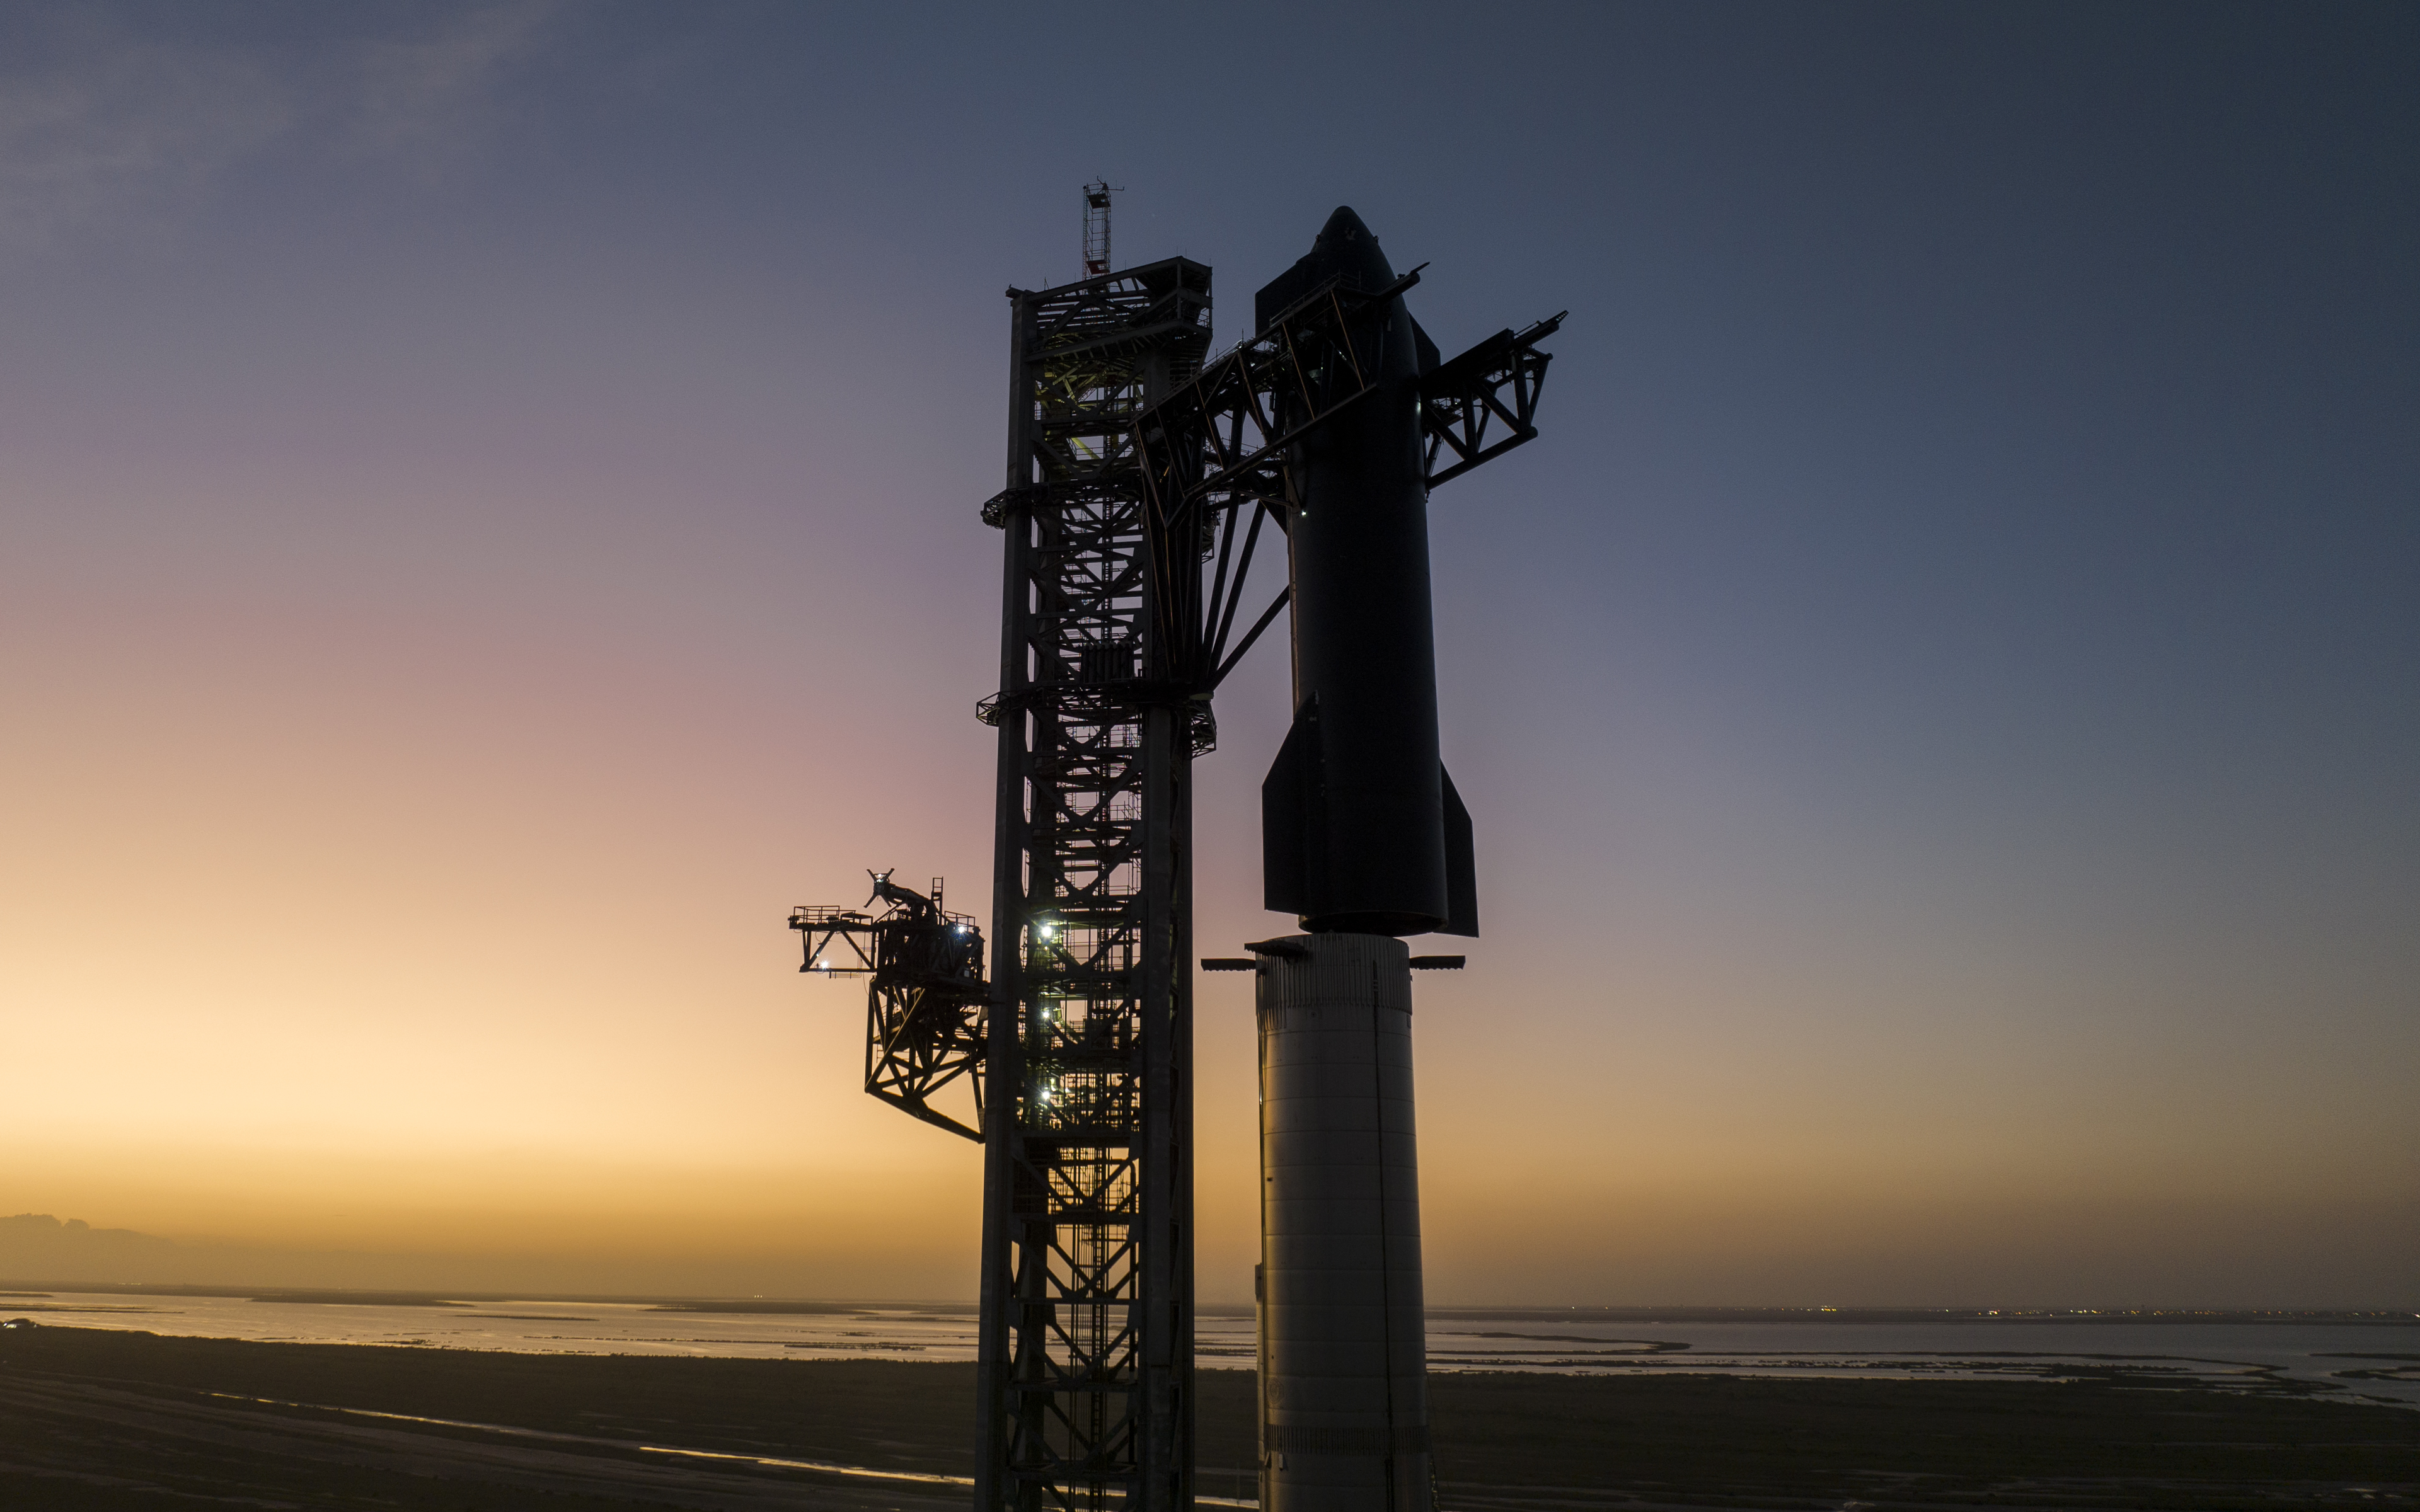 starship on top of a rocket at sunset, with a launch tower beside